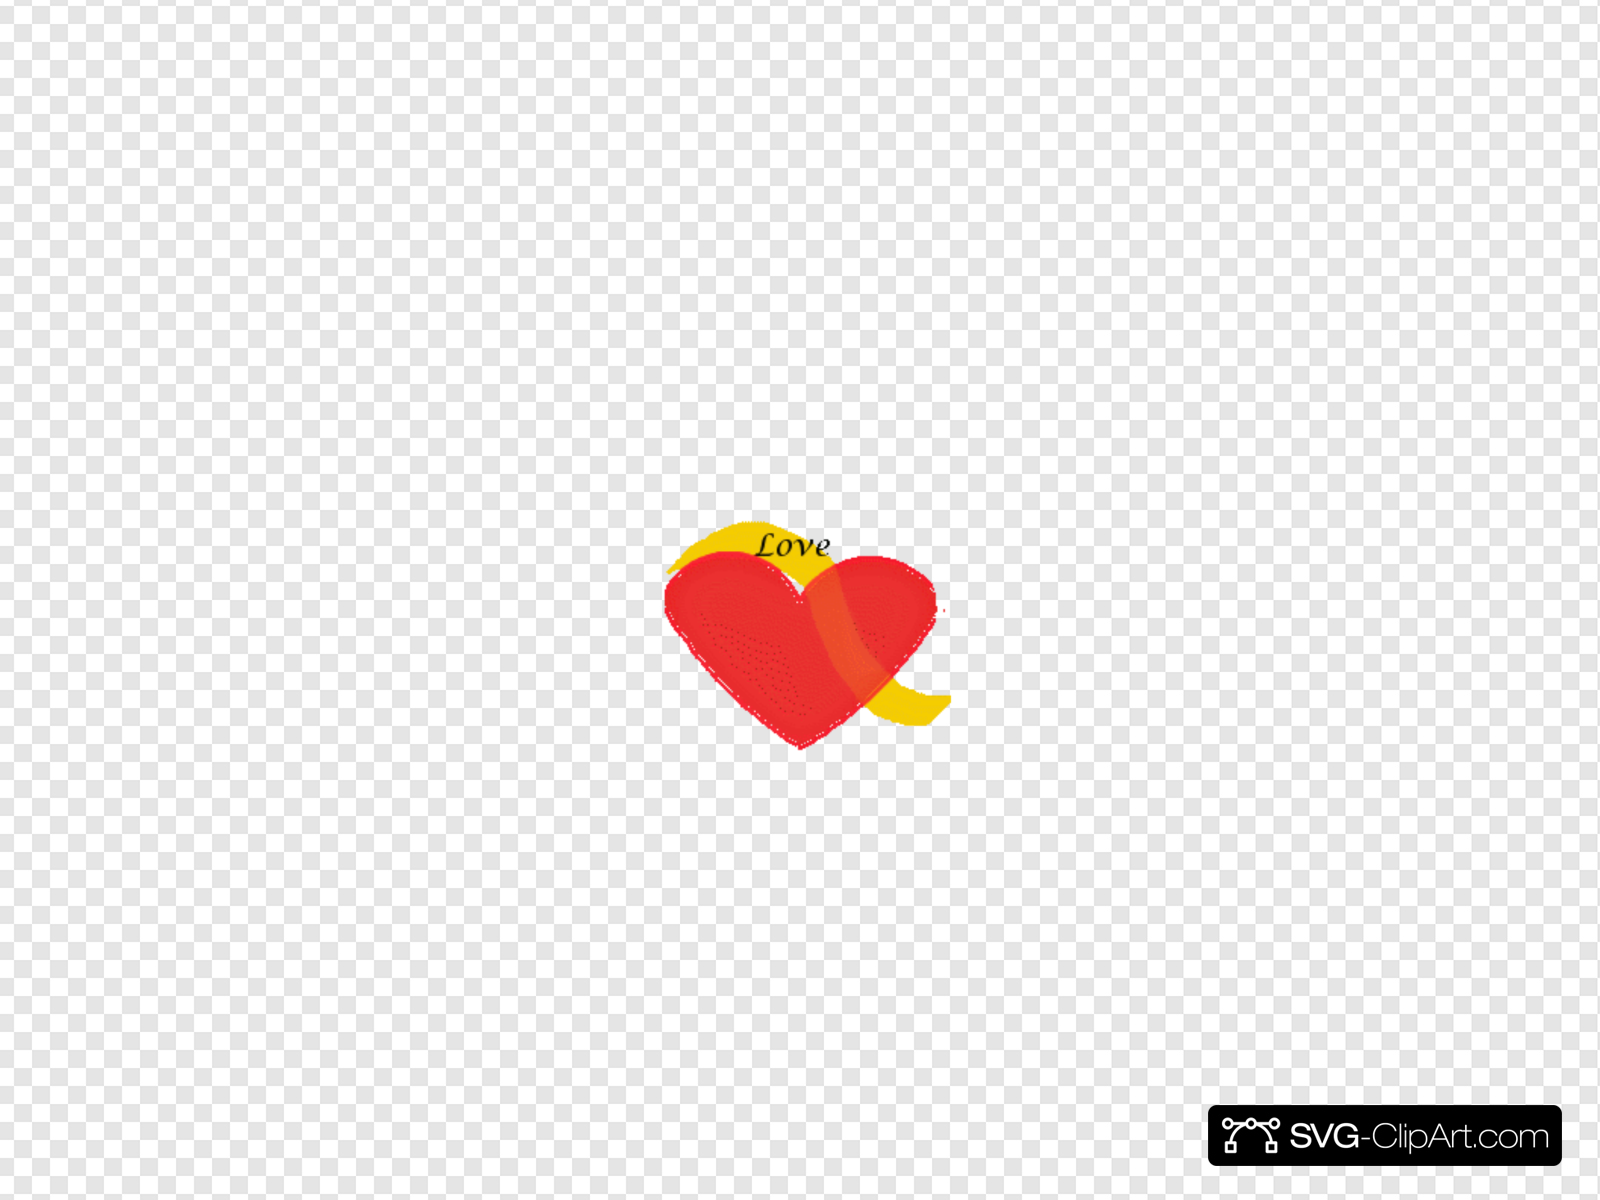 Heart Herz Clip art, Icon and SVG